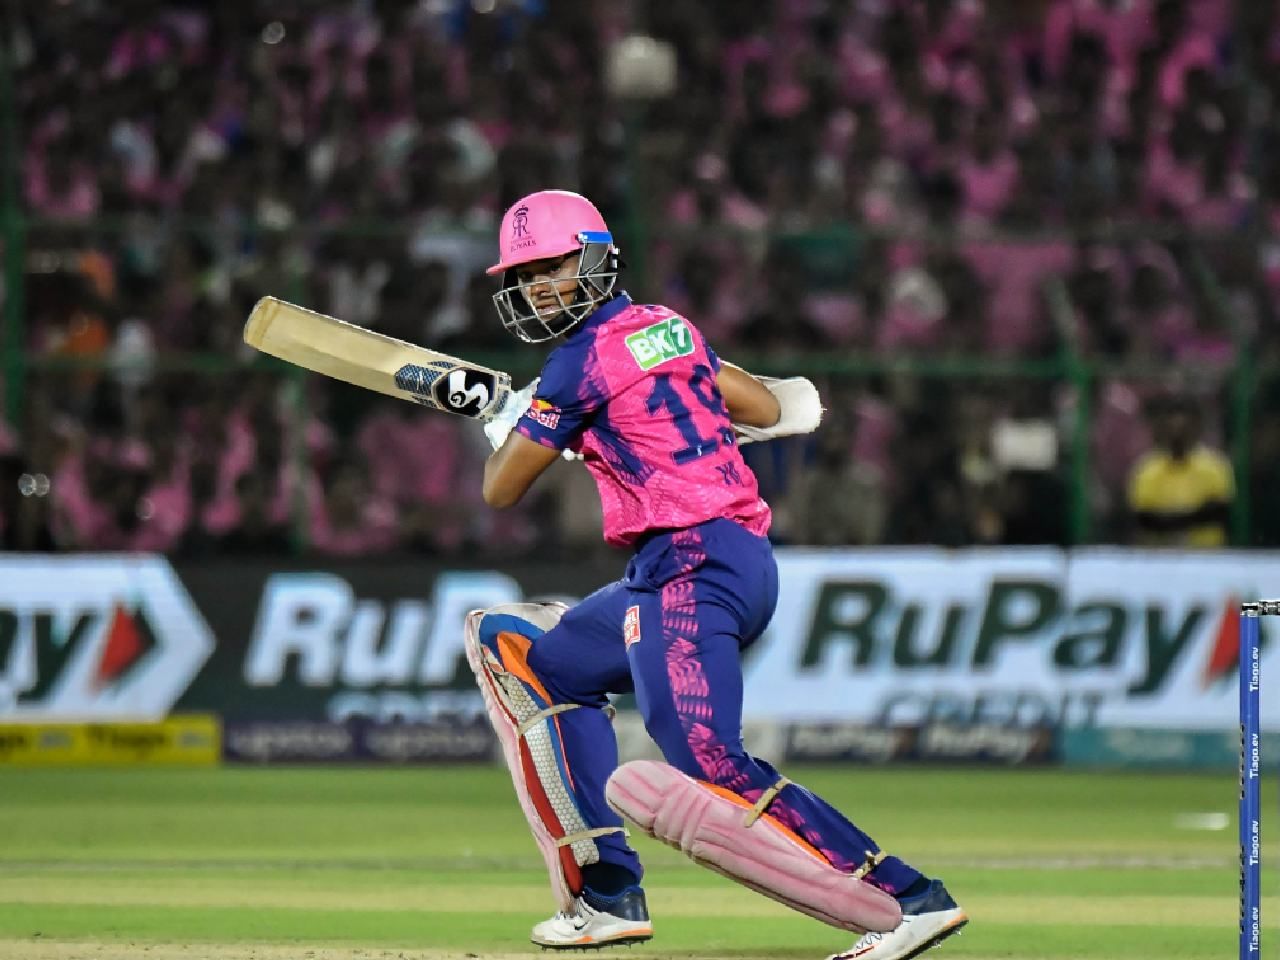 Yashasvi Jaiswal becomes second fastest Indian to score 1000 runs in IPL